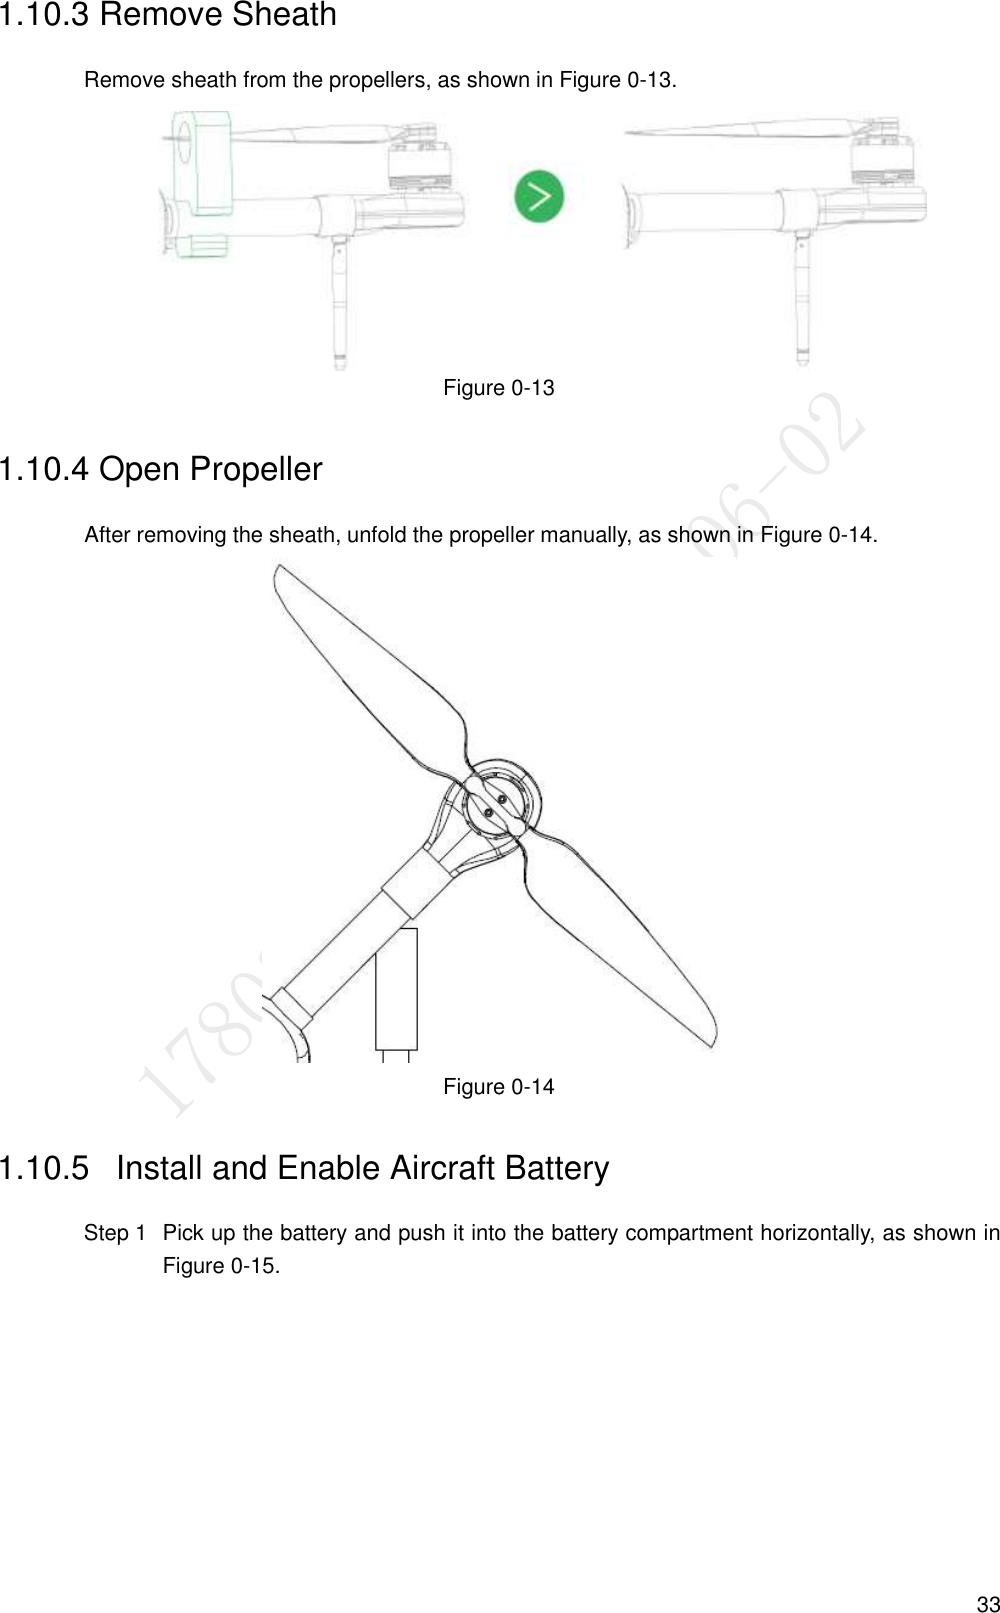  33 1.10.3 Remove Sheath Remove sheath from the propellers, as shown in Figure 0-13.  Figure 0-13 1.10.4 Open Propeller                   After removing the sheath, unfold the propeller manually, as shown in Figure 0-14.  Figure 0-14 1.10.5   Install and Enable Aircraft Battery   Pick up the battery and push it into the battery compartment horizontally, as shown in Step 1Figure 0-15. 